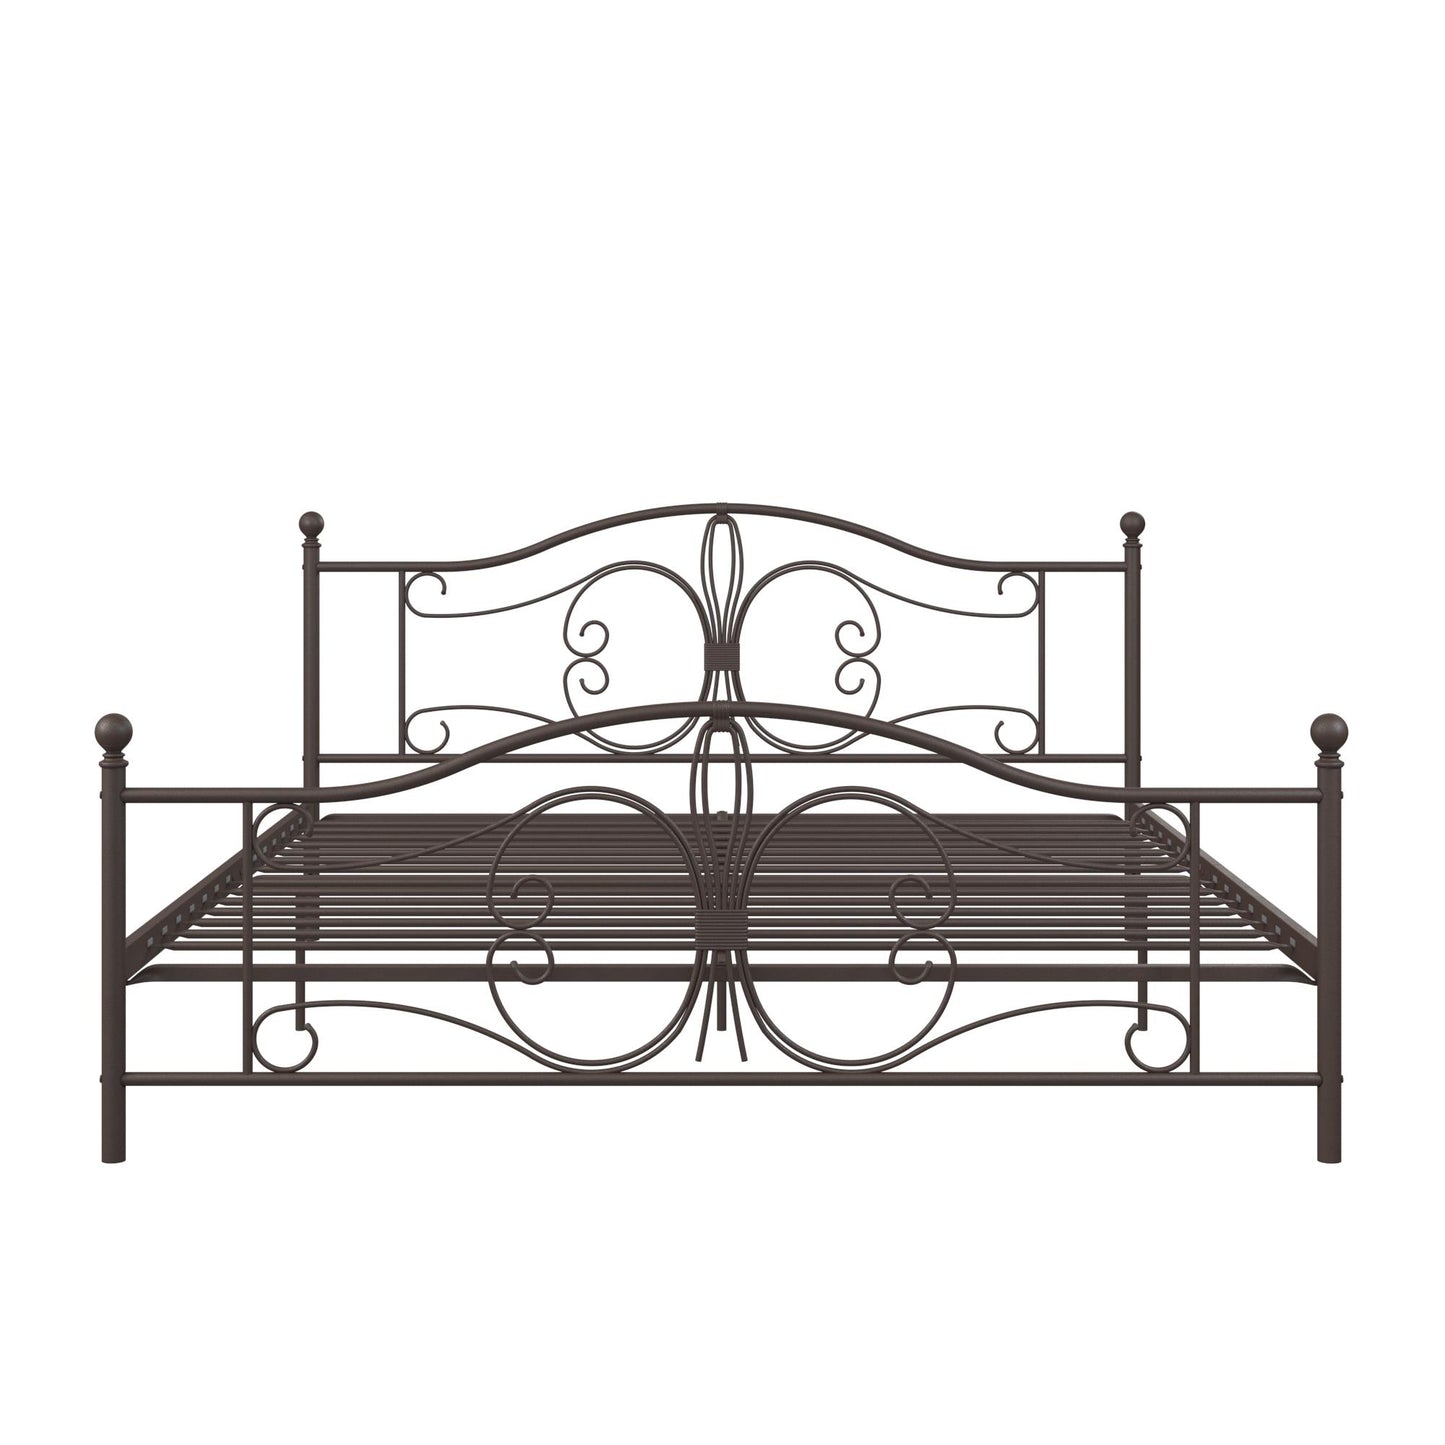 Bombay Victorian Metal Bed with Secured Metal Slats - Bronze - King